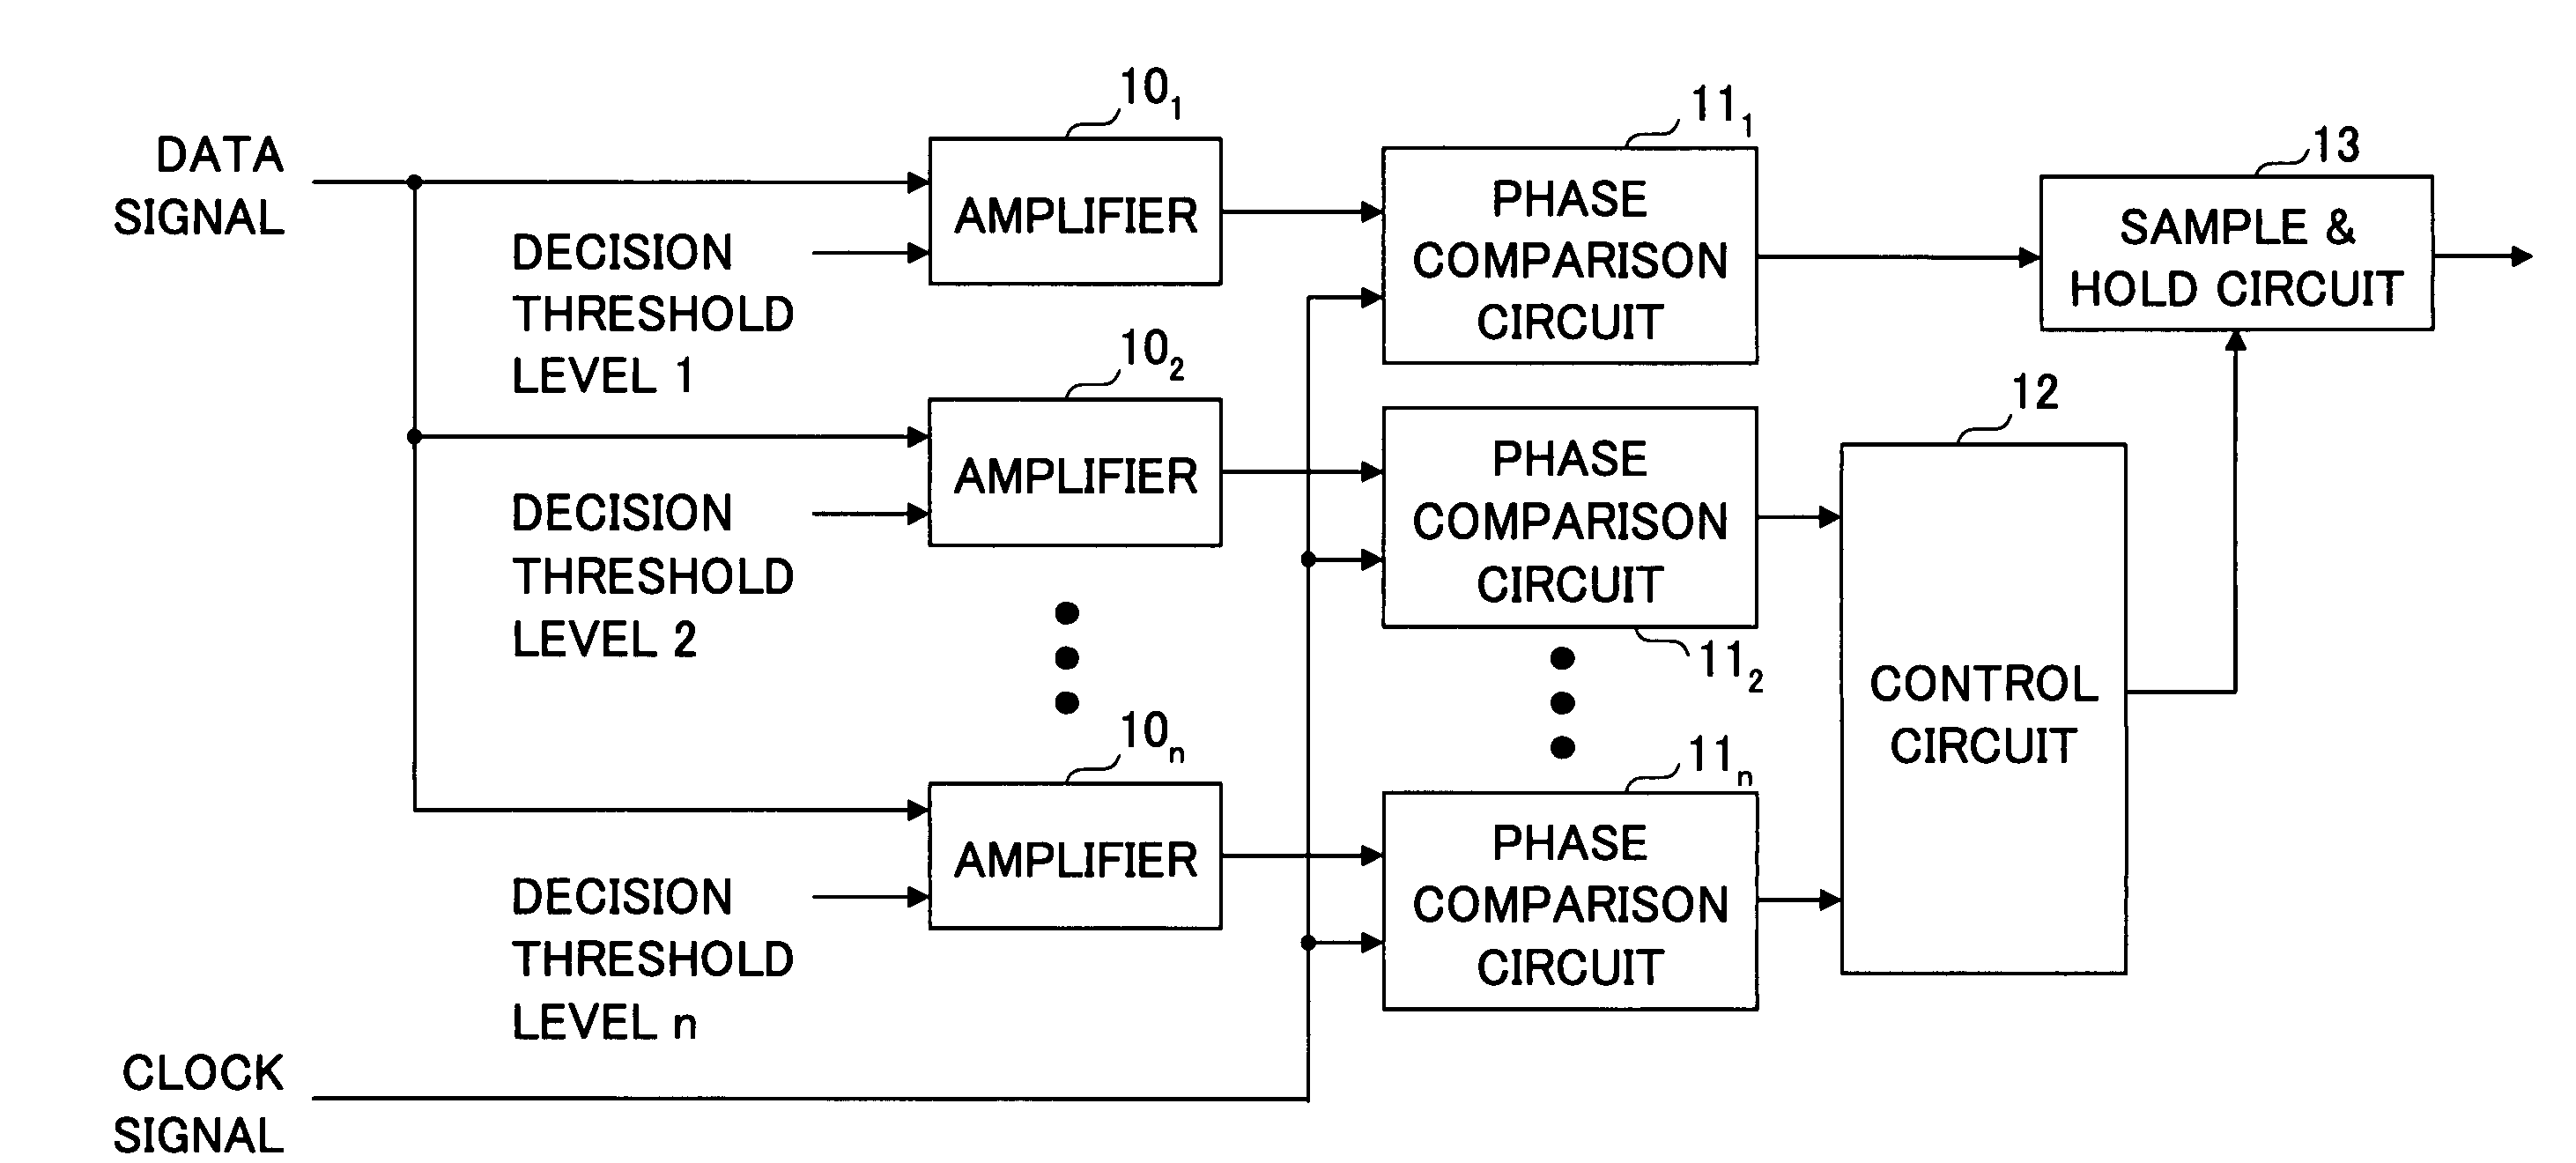 Phase comparison circuit and clock recovery circuit